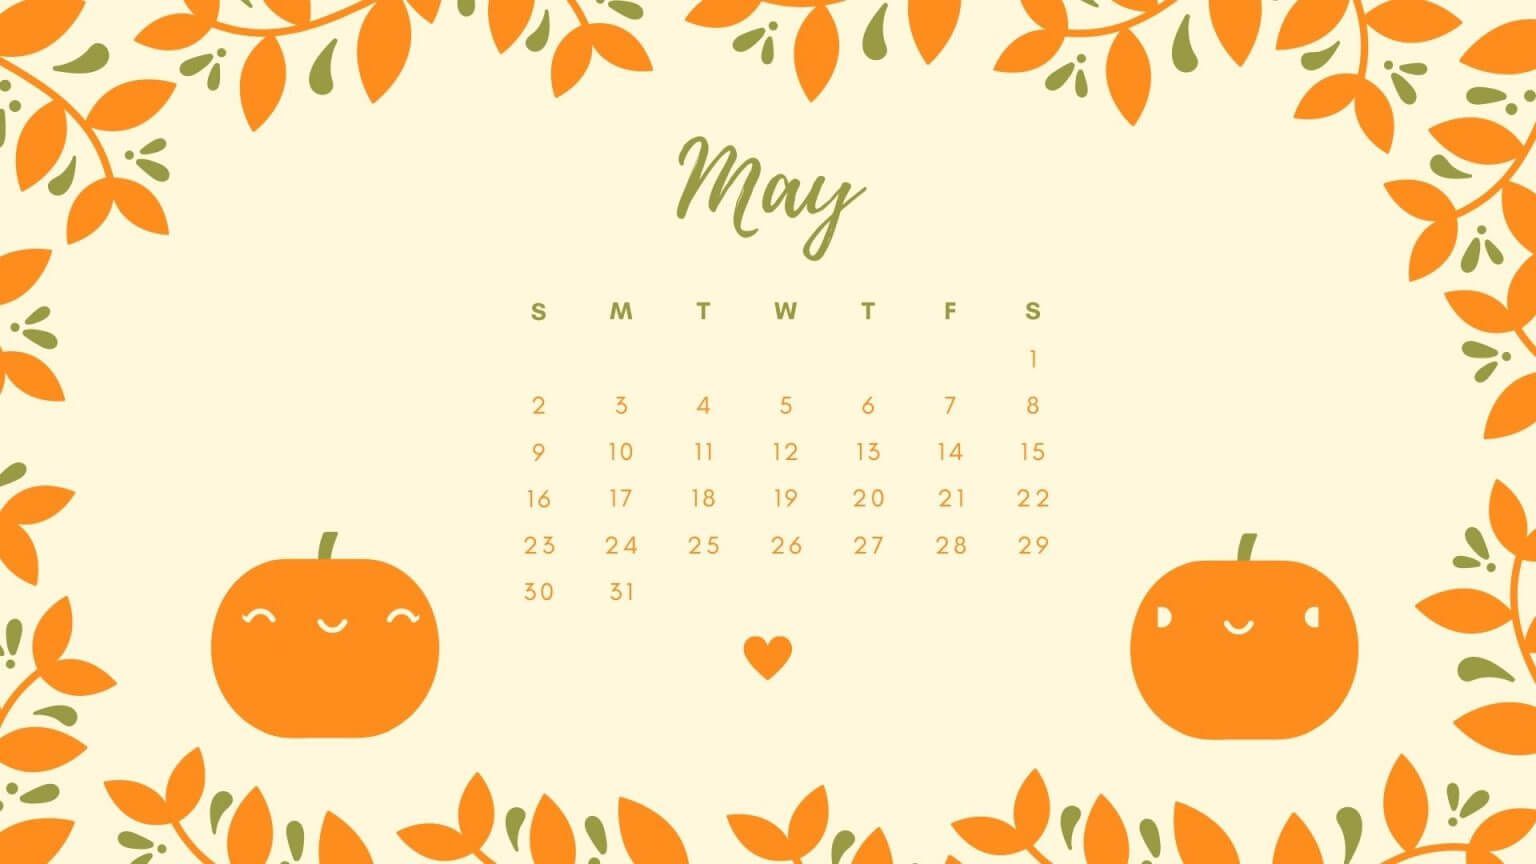 may 2021 calendar with holidays